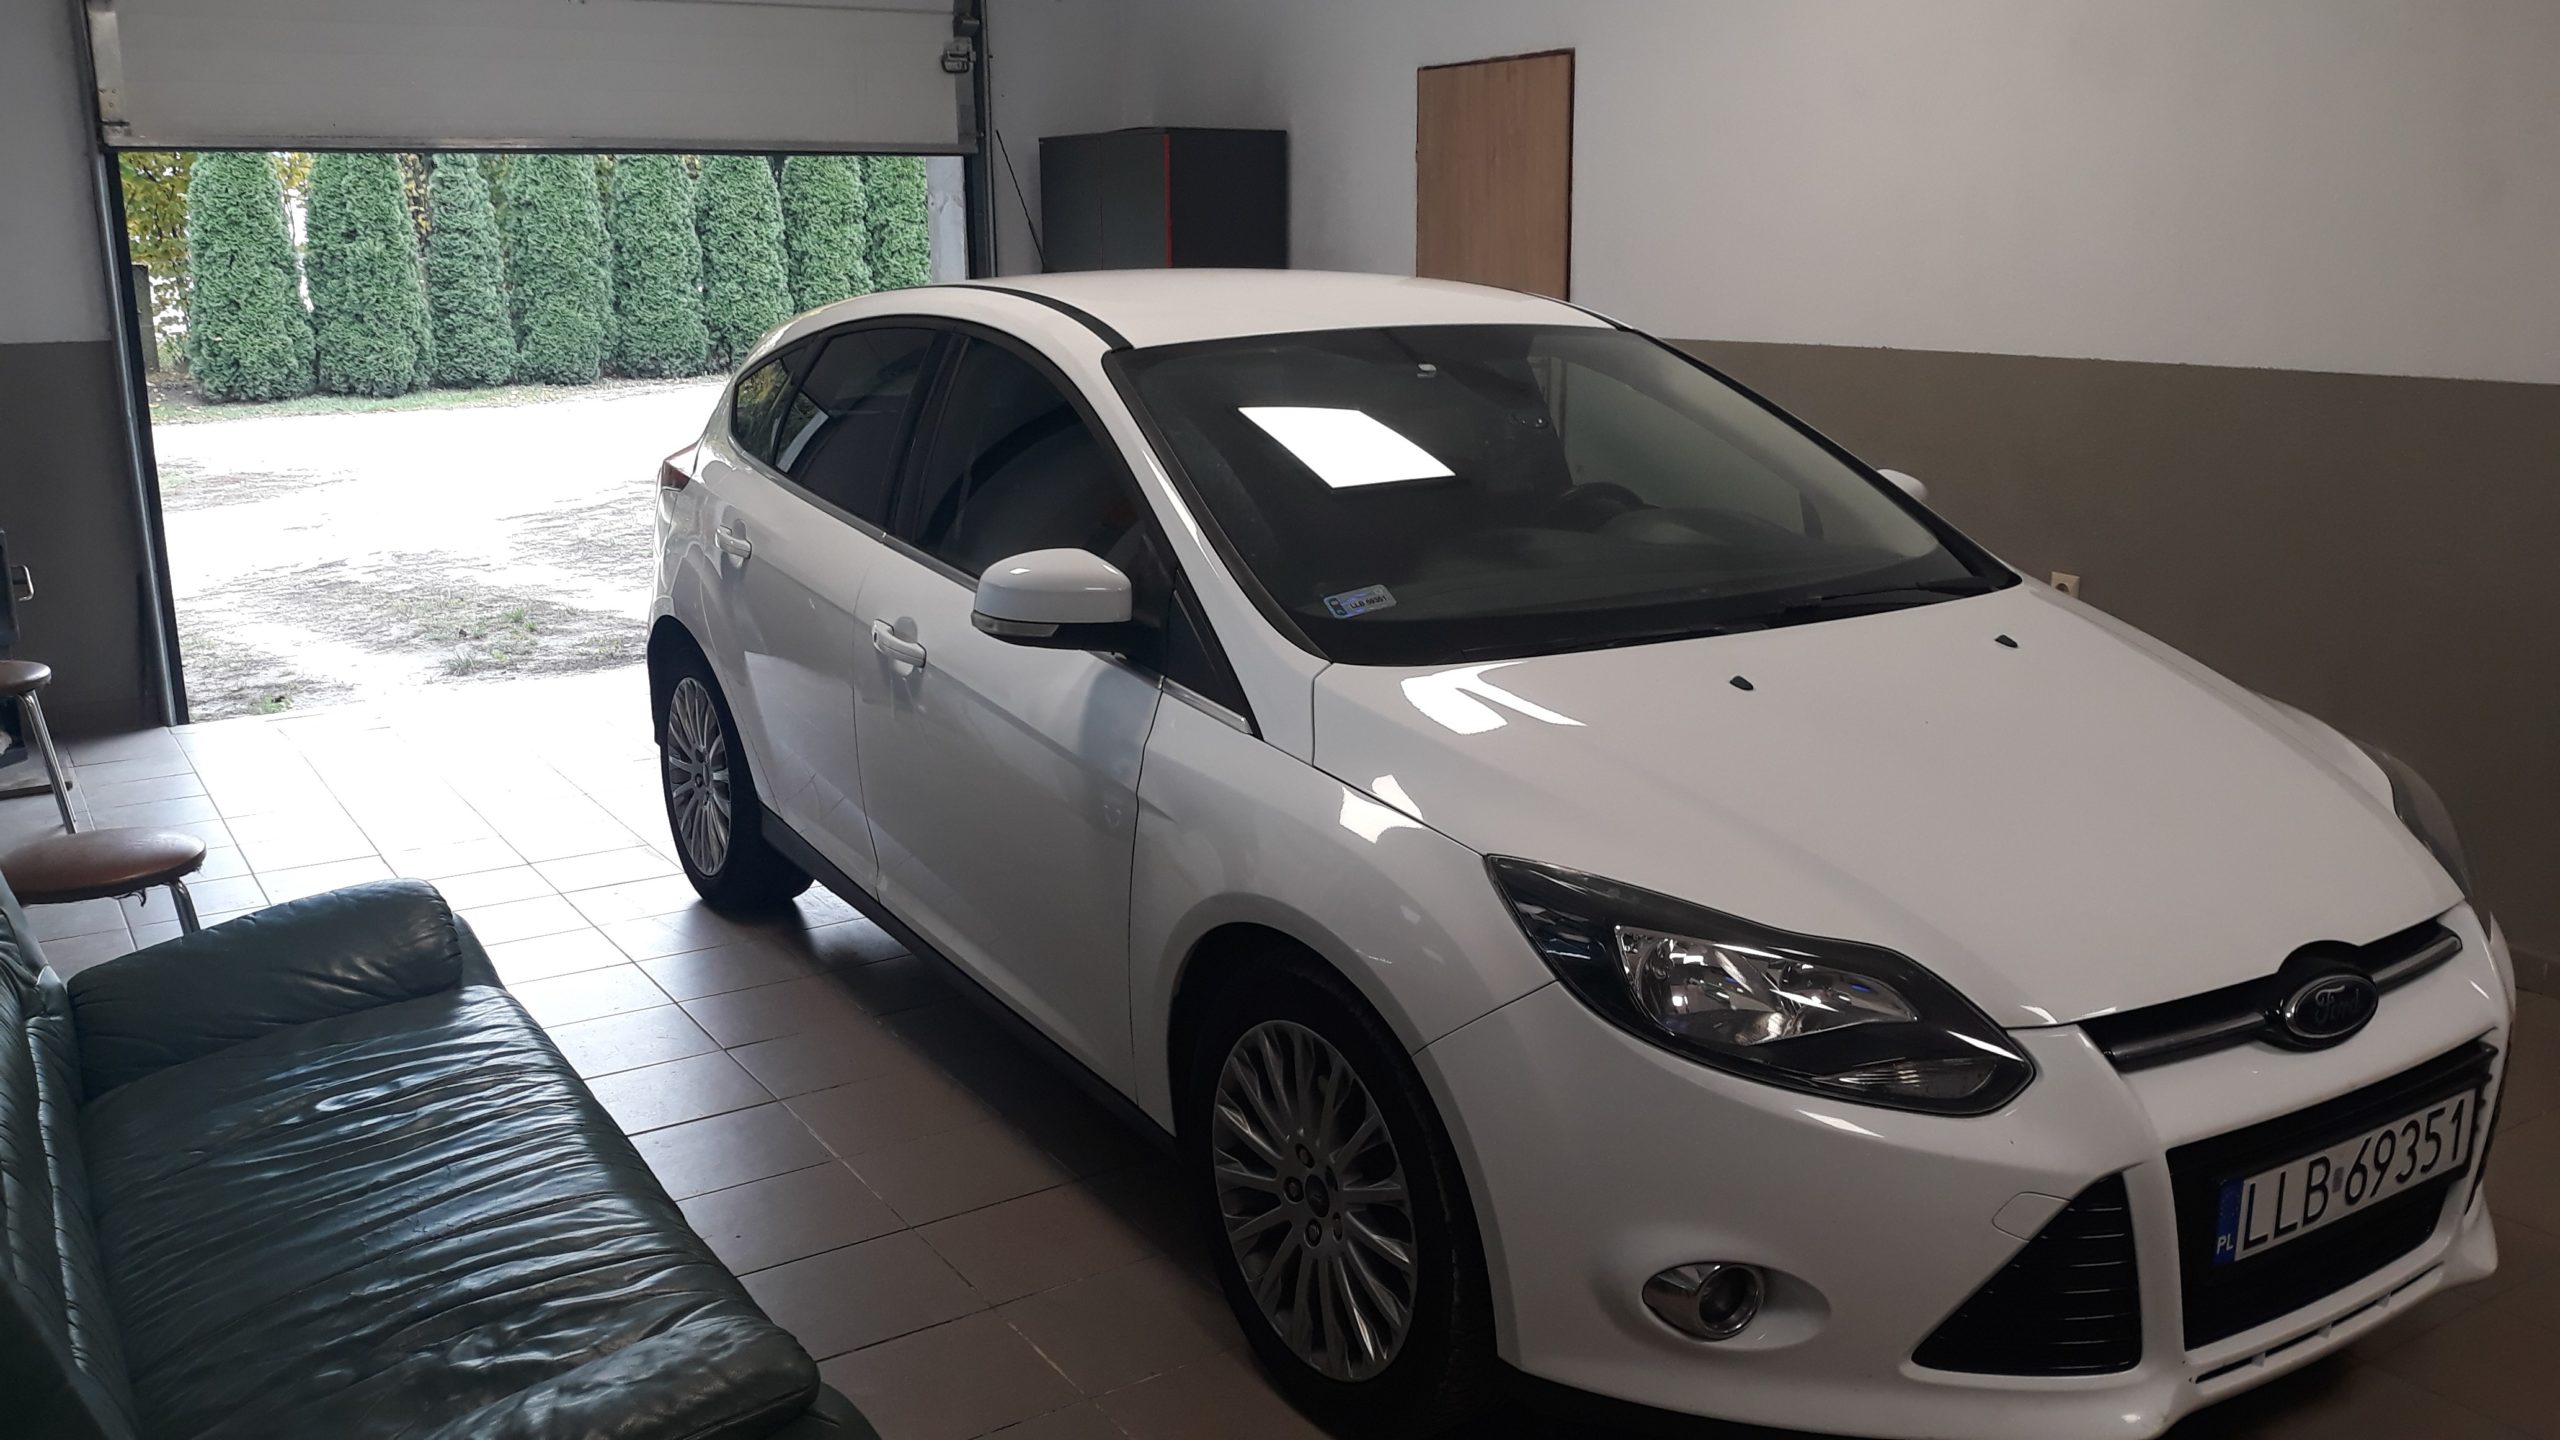 Ford Focus mk3 2.0 tdci 163ps 2012